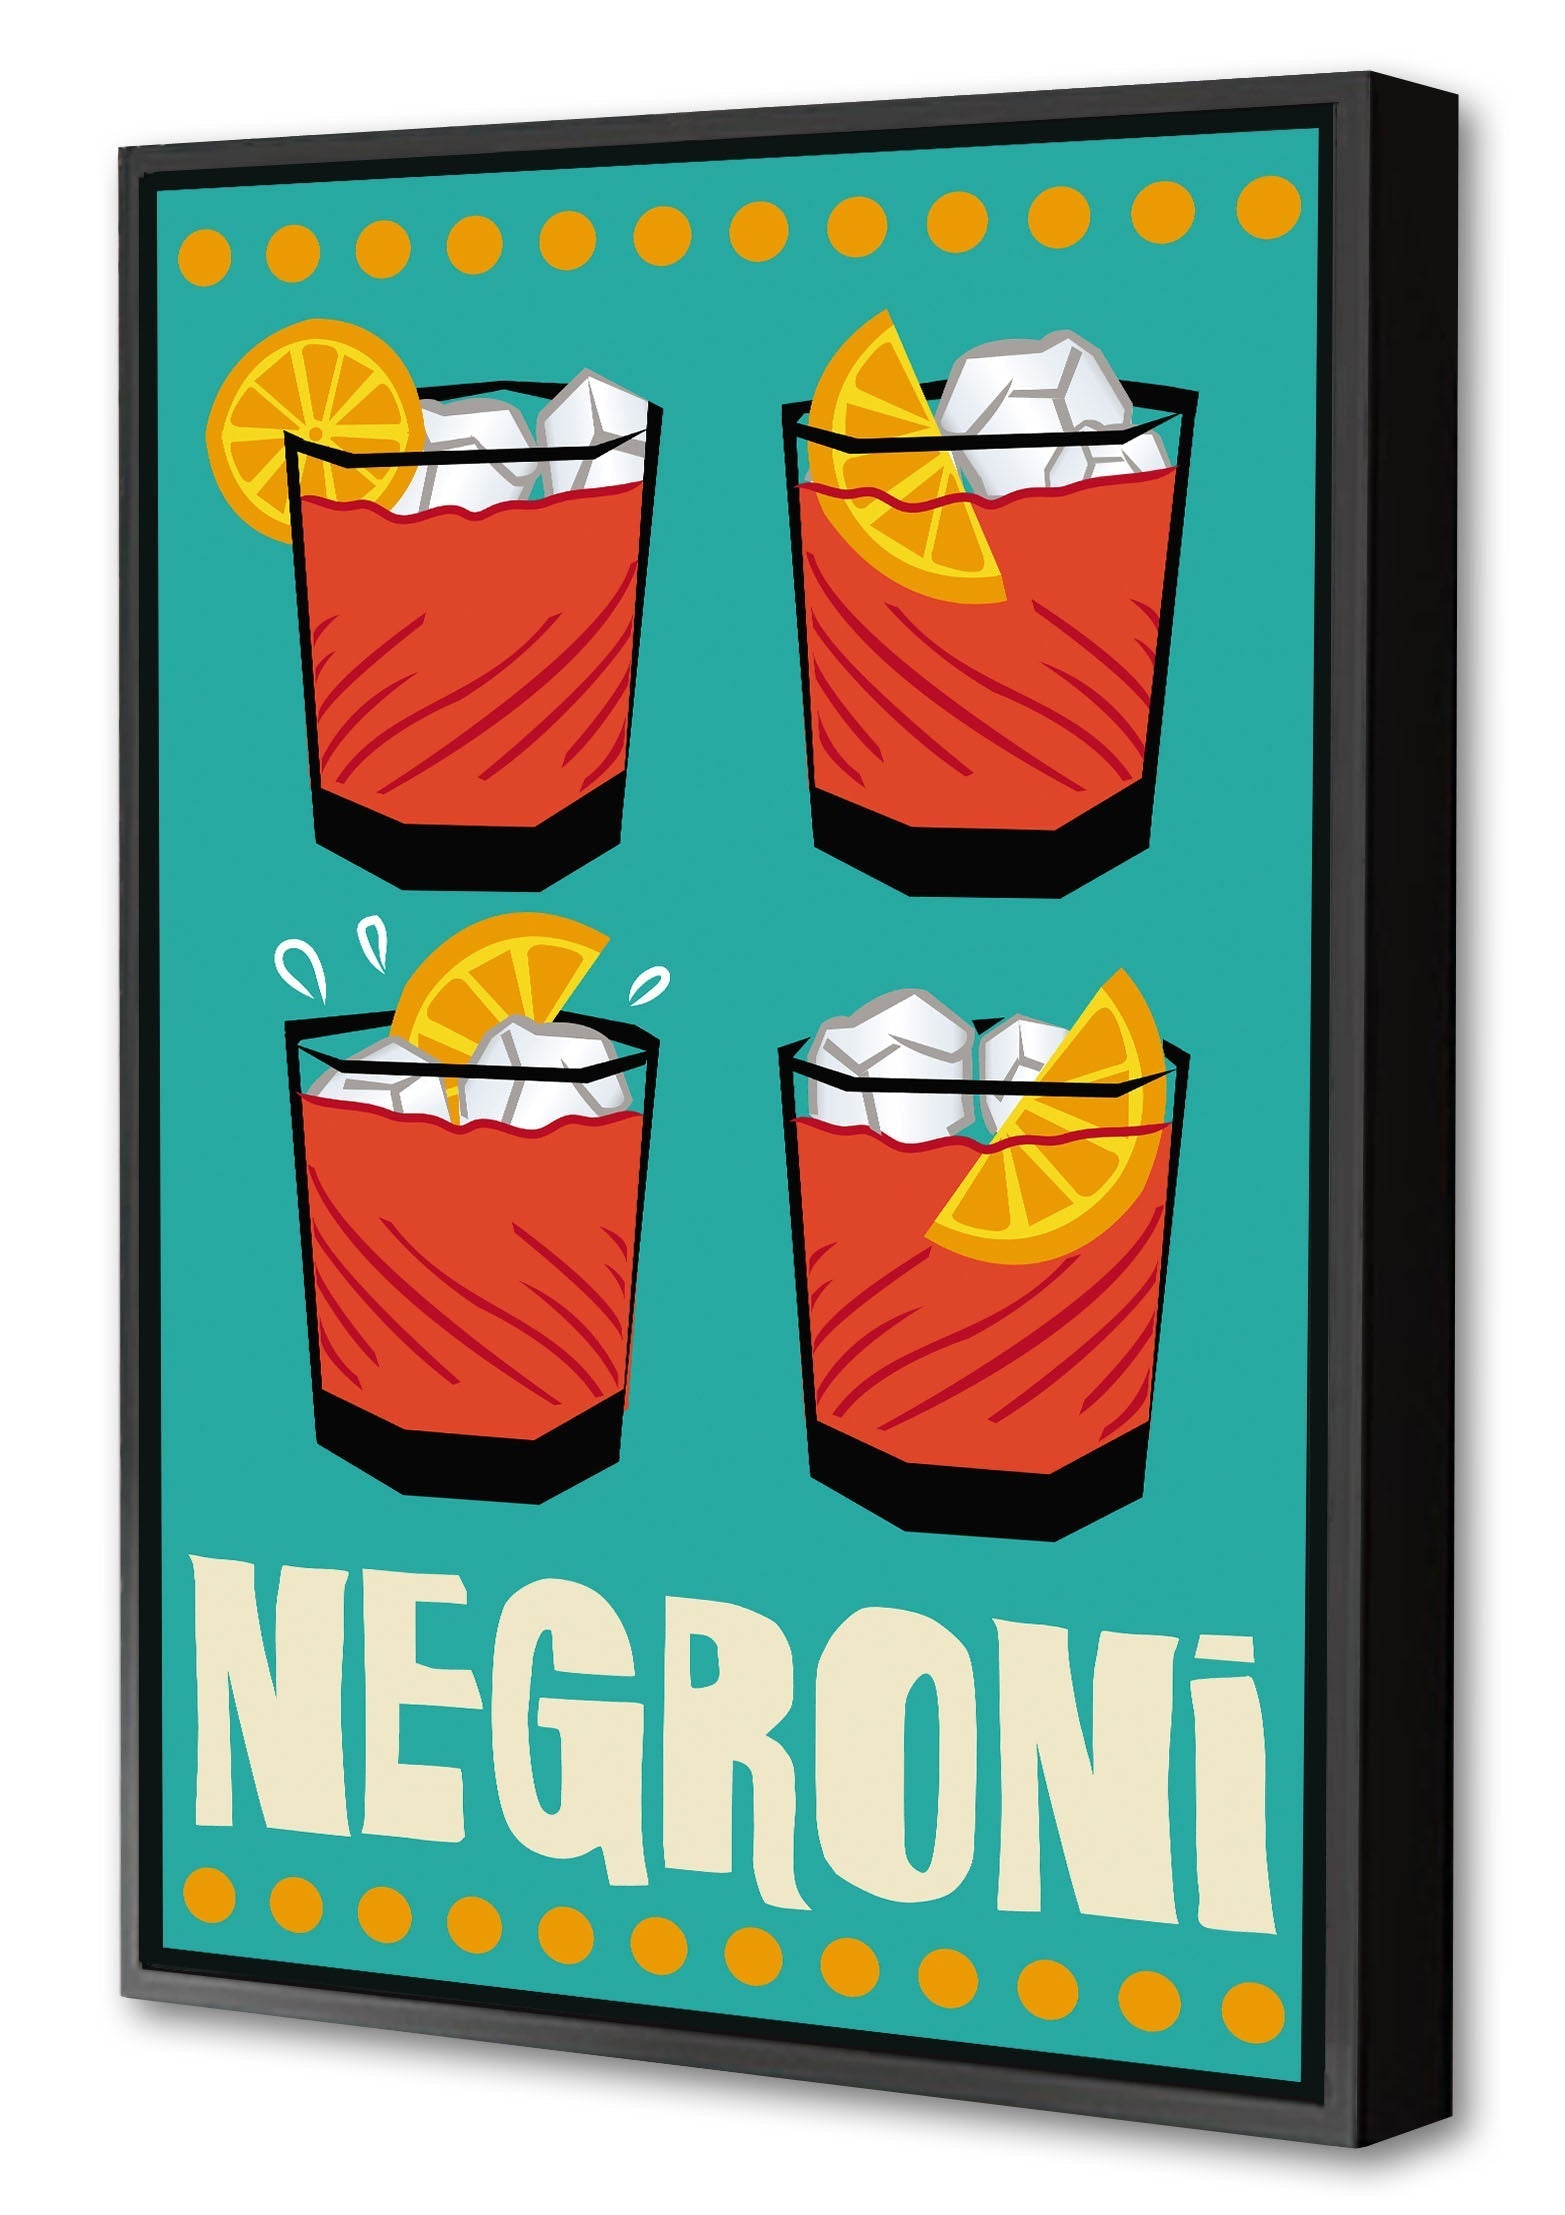 Negroni-cocktails, print-Canvas Print with Box Frame-40 x 60 cm-BLUE SHAKER